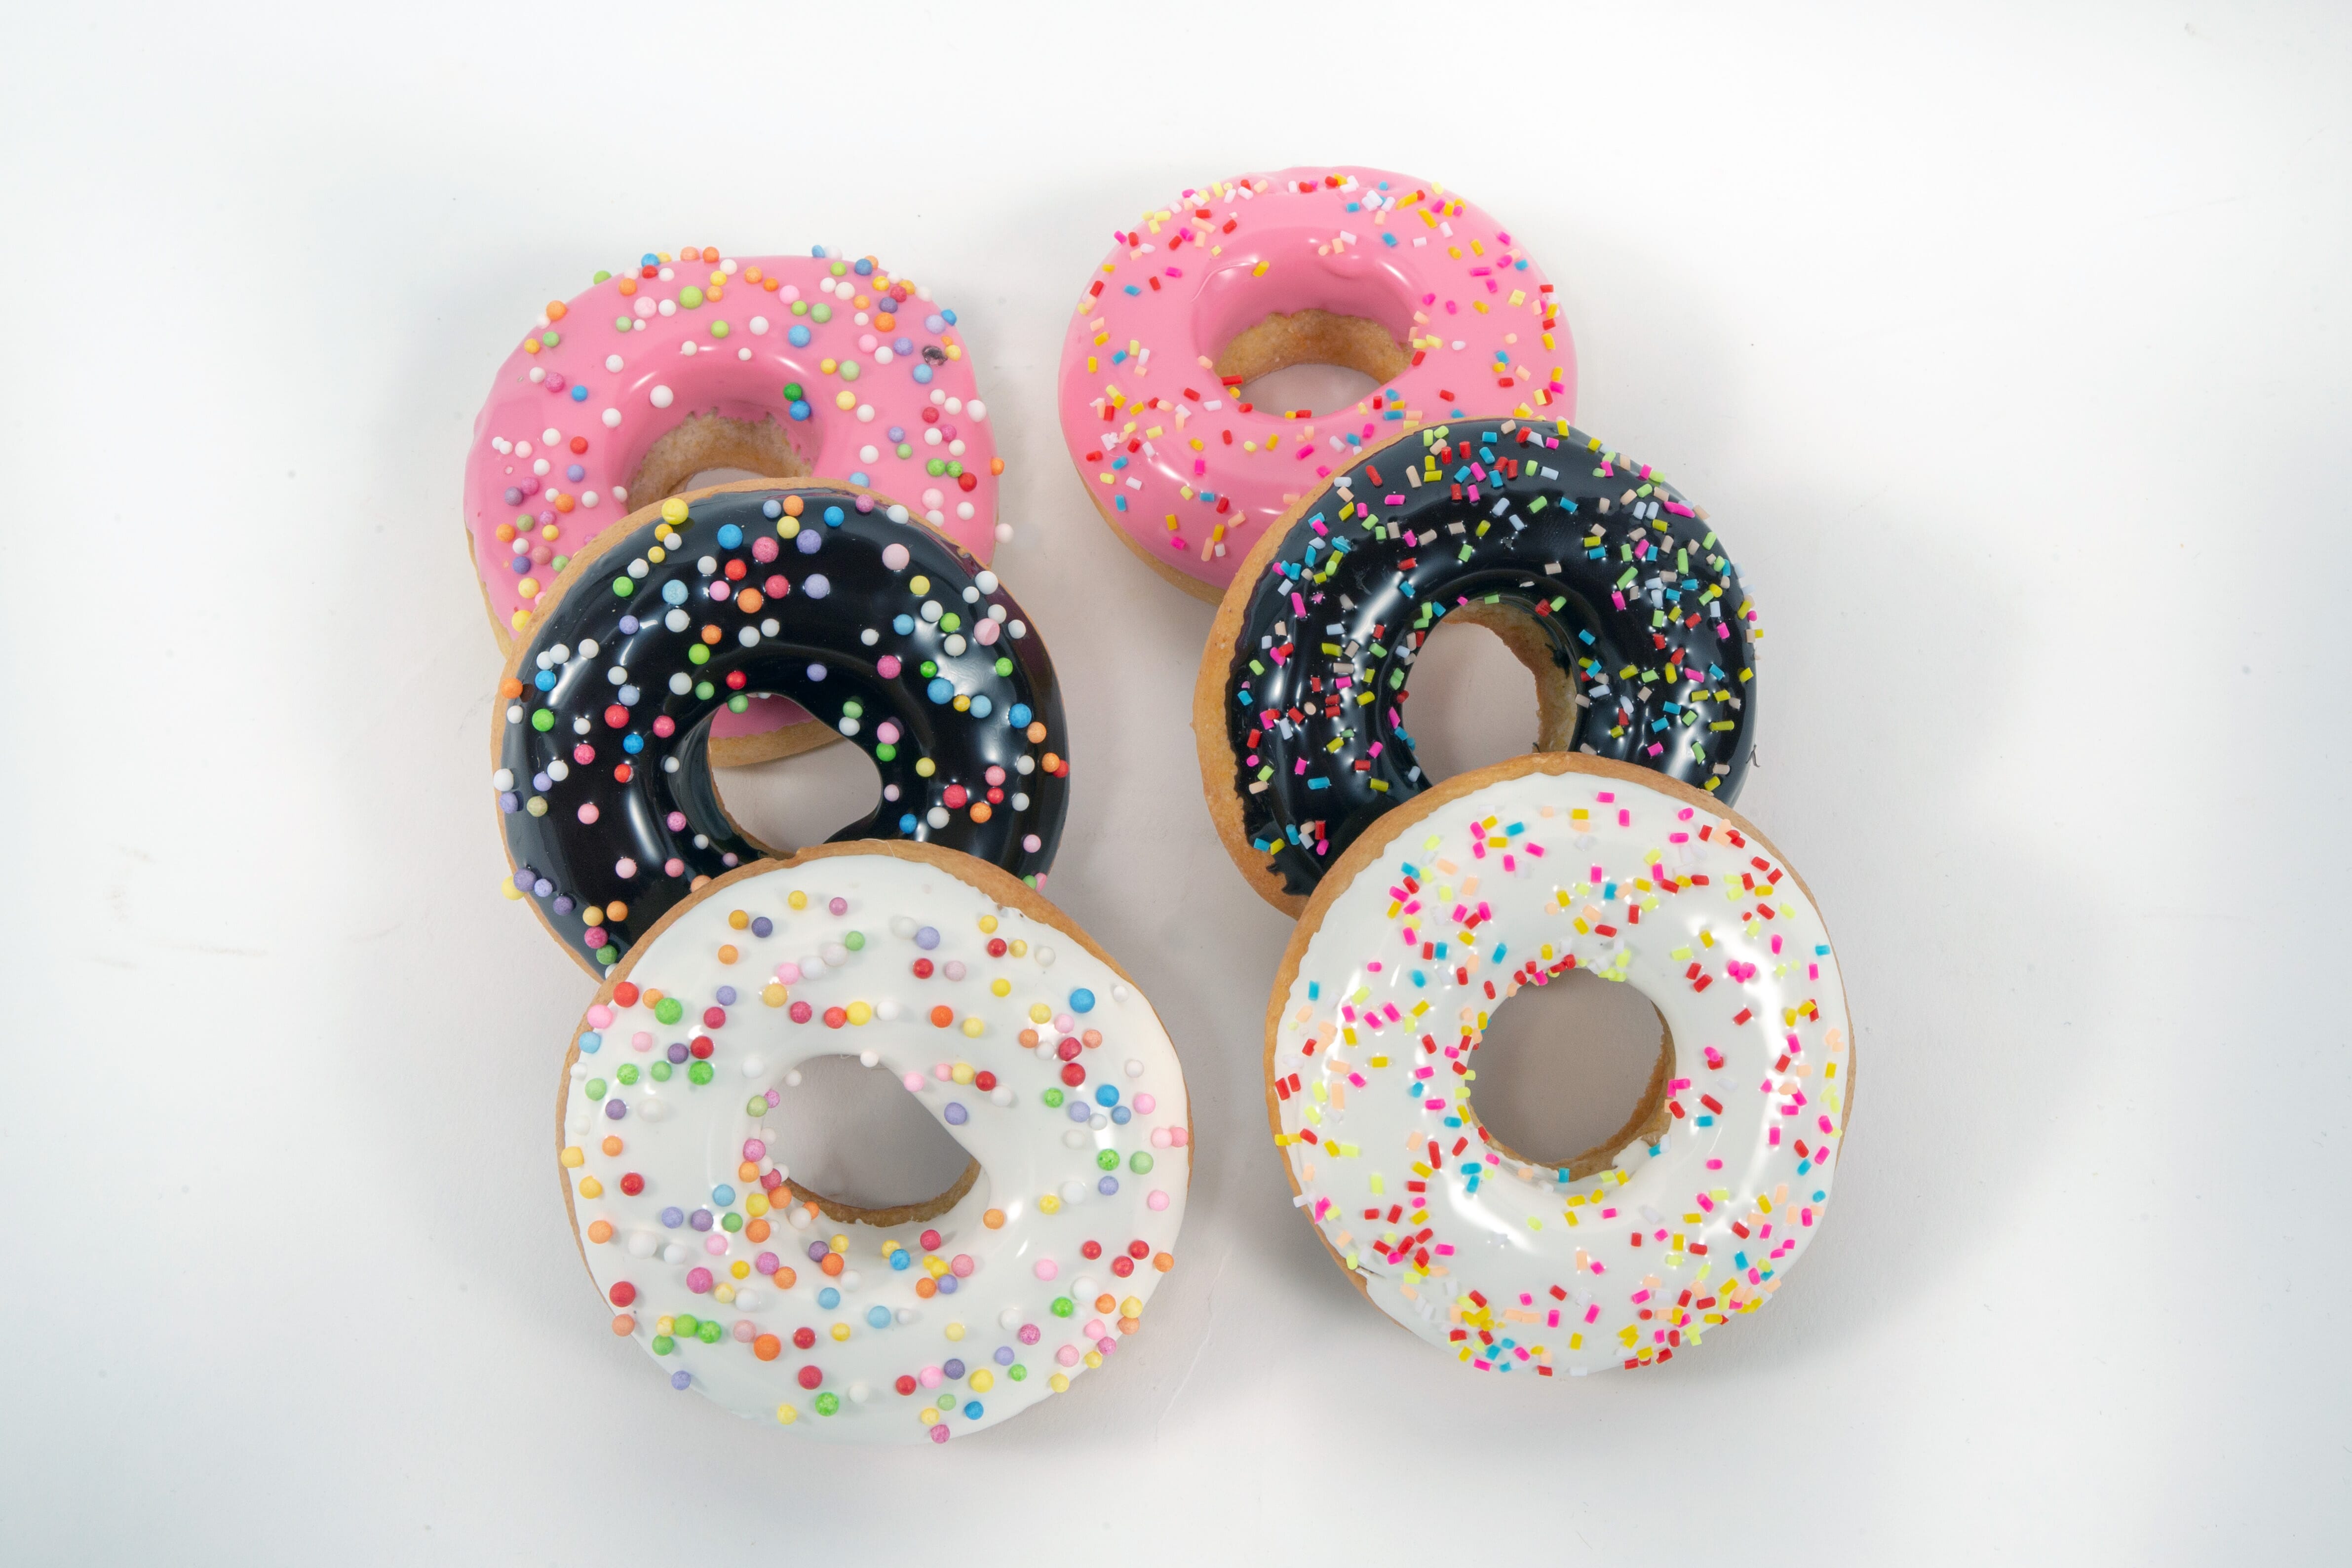 6 Pack of Fake Donuts of Assorted Flavors with Sprinkles - Pack C